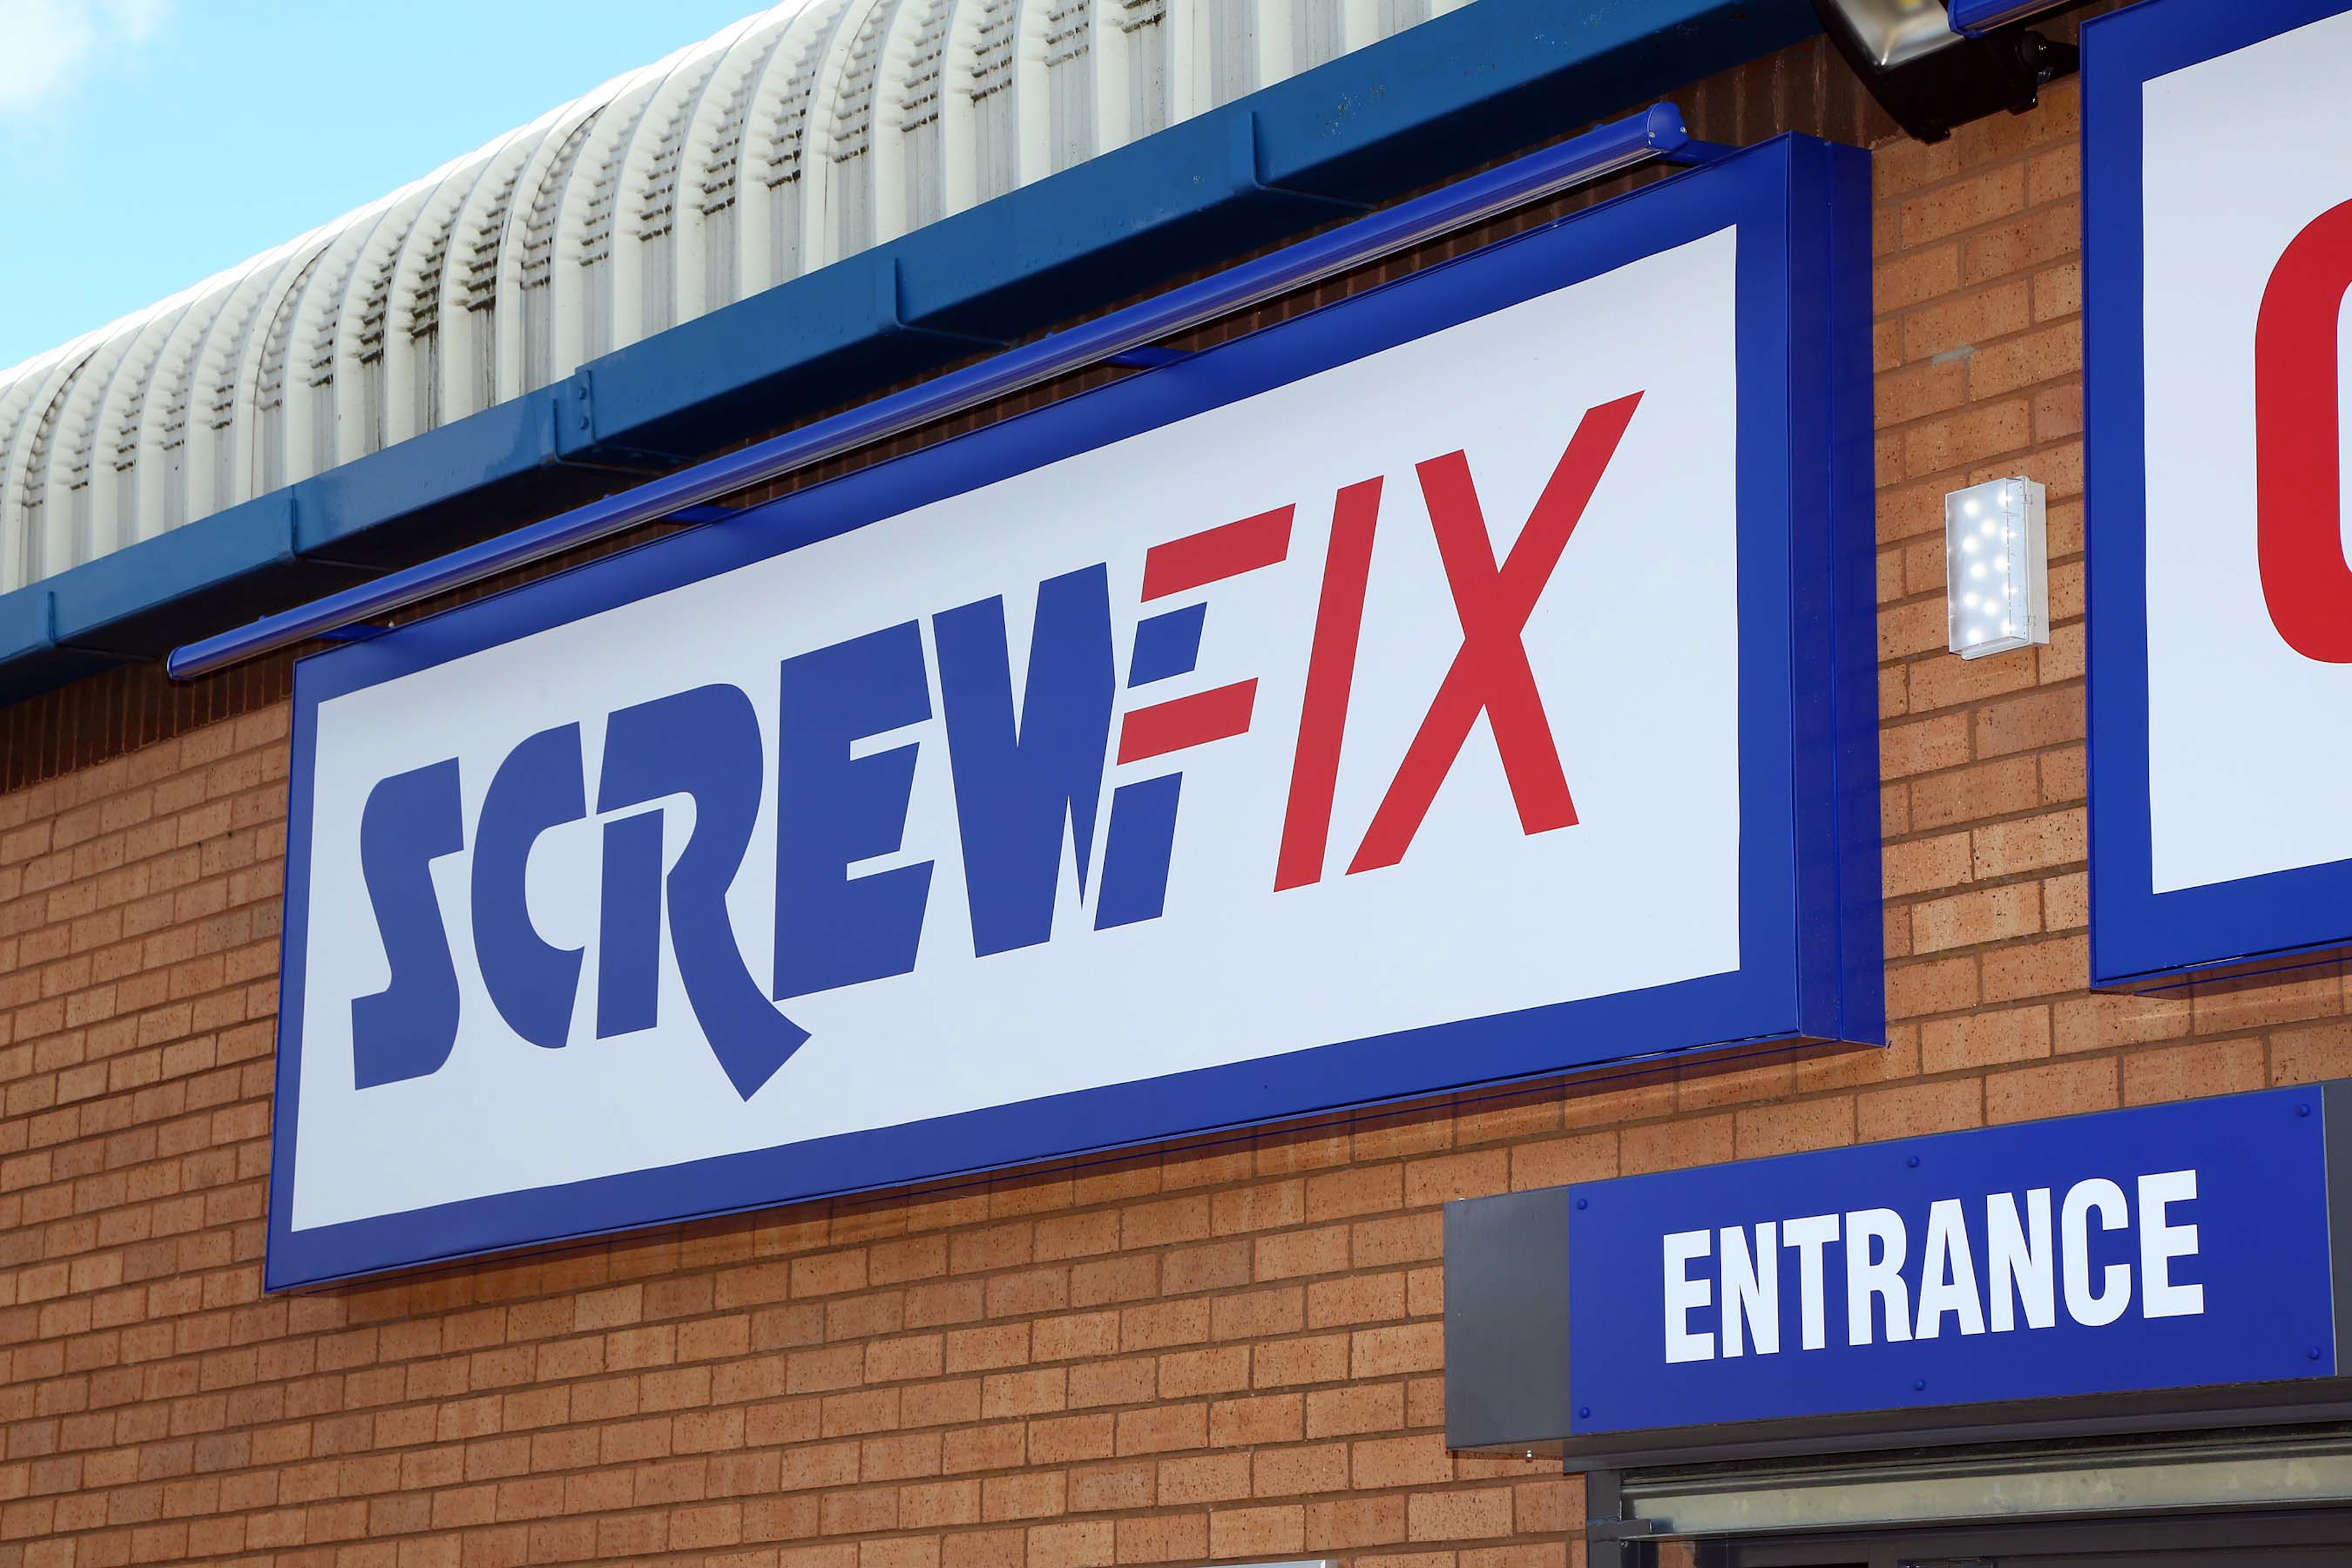 Surrey Canal’s first Screwfix store to open in August